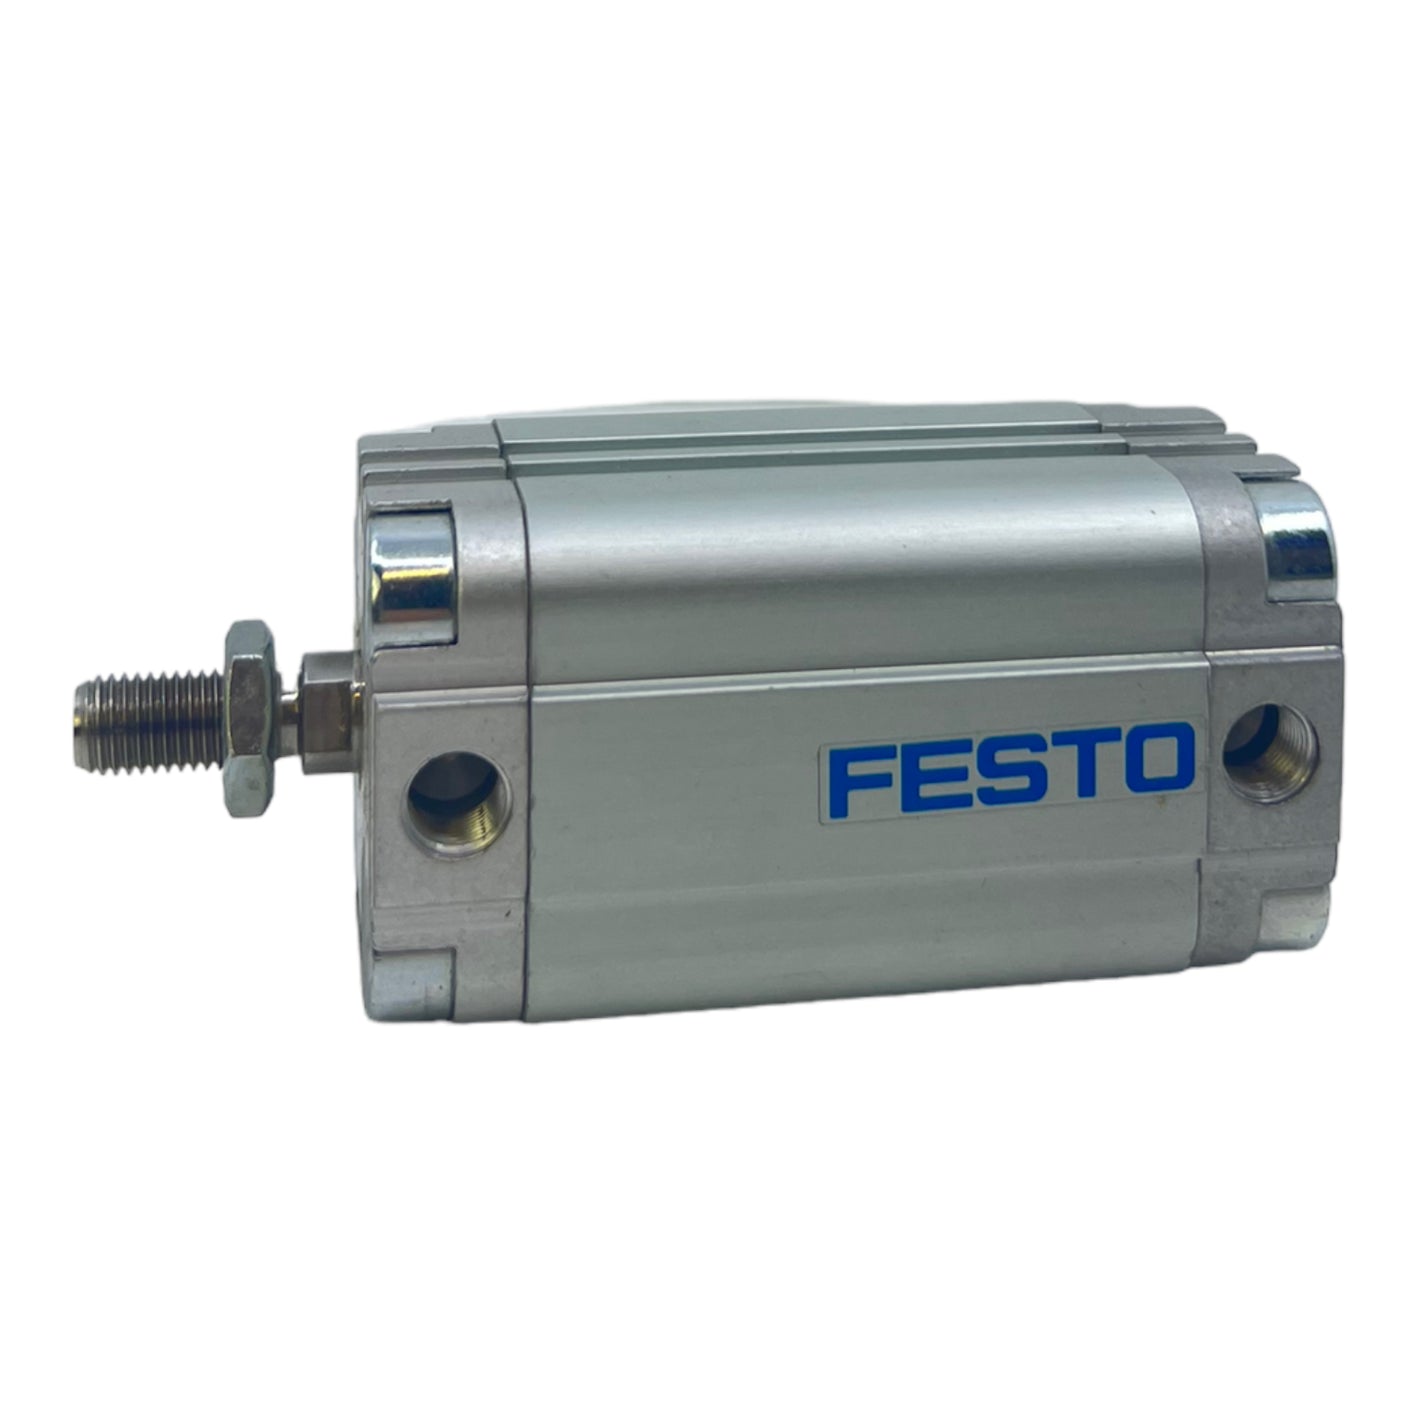 Festo ADVU-32-50-APA compact cylinder 156623 0.8 to 10 bar double-acting 